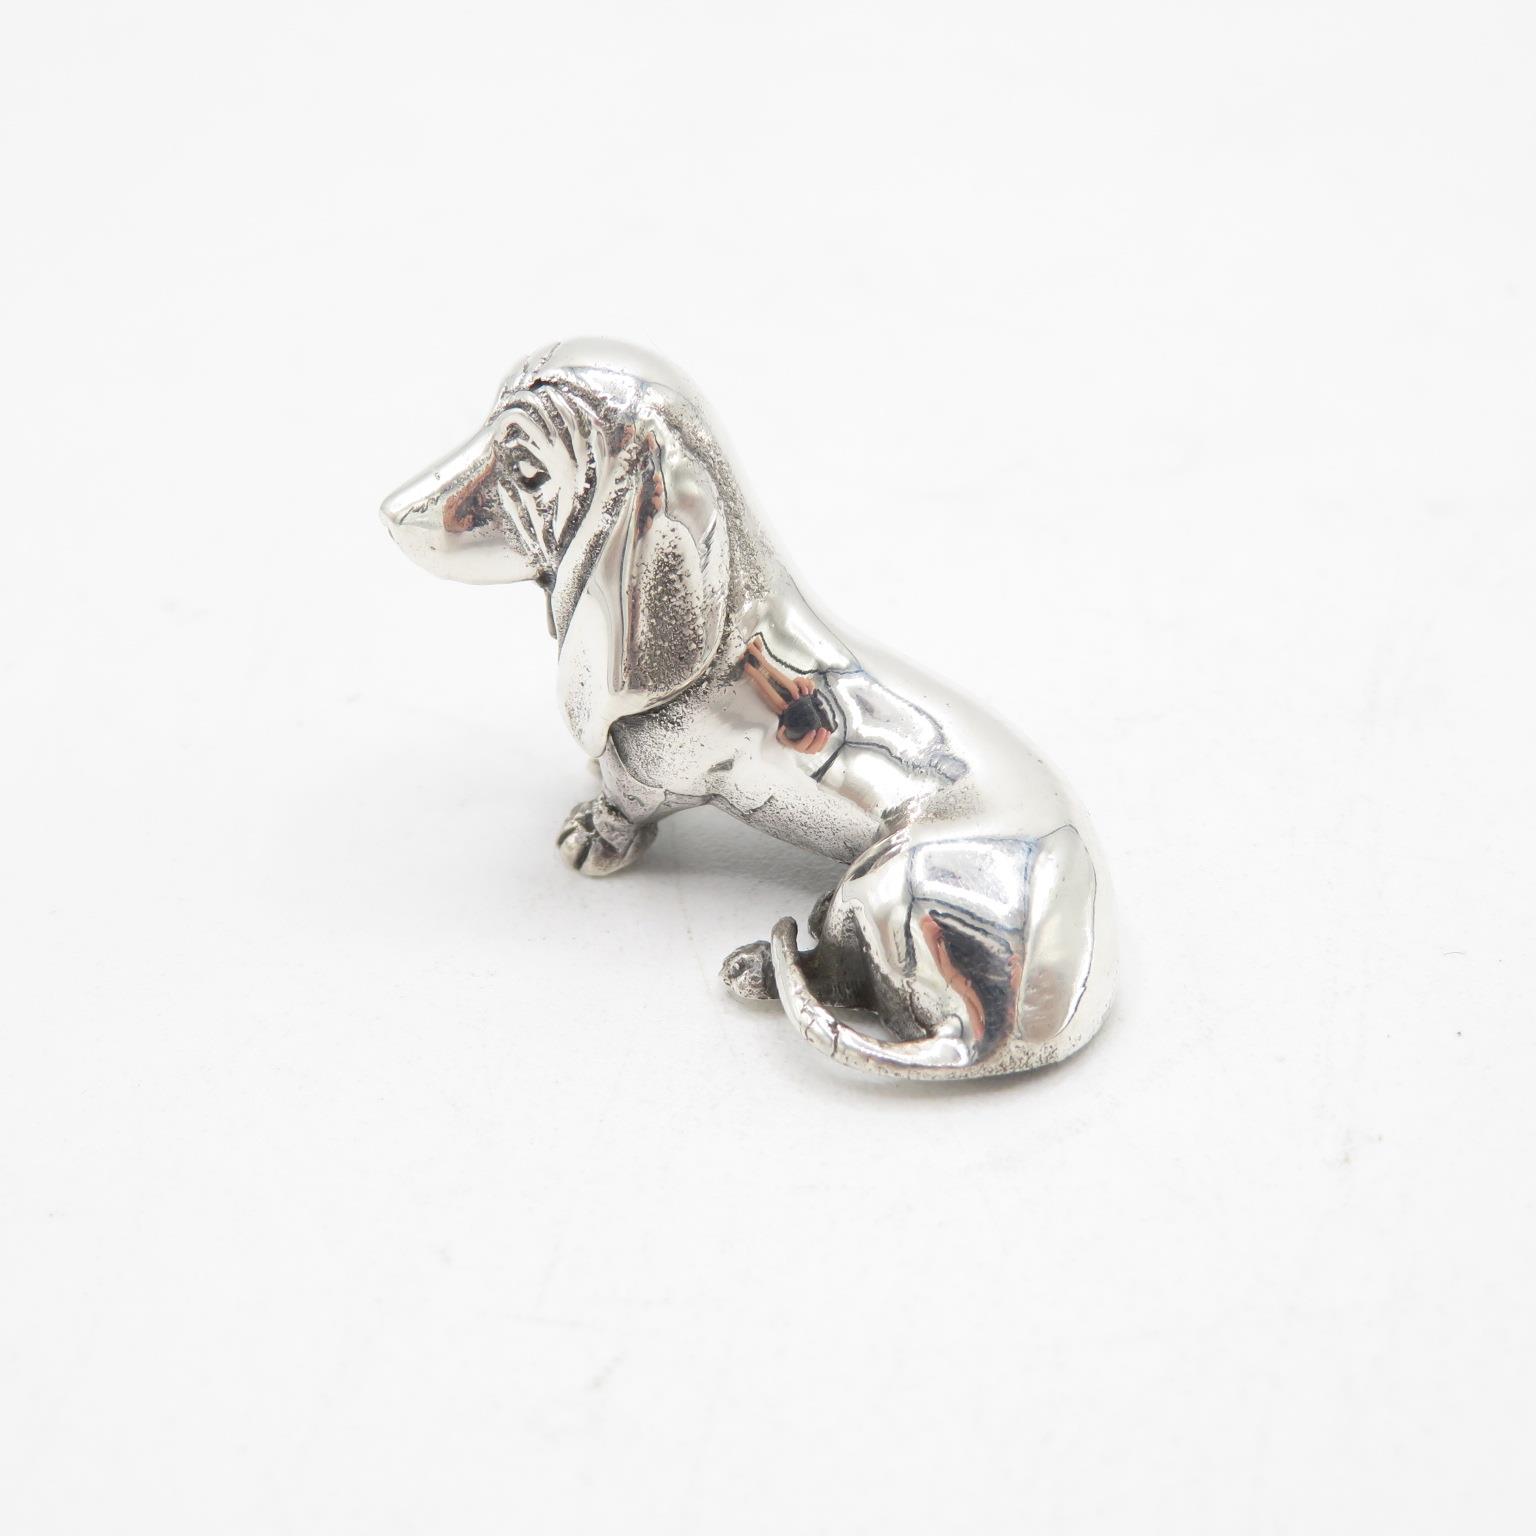 HM 925 Sterling Silver Dachshund Sausage Dog in excellent condition (15g) 40mm long - Image 3 of 5